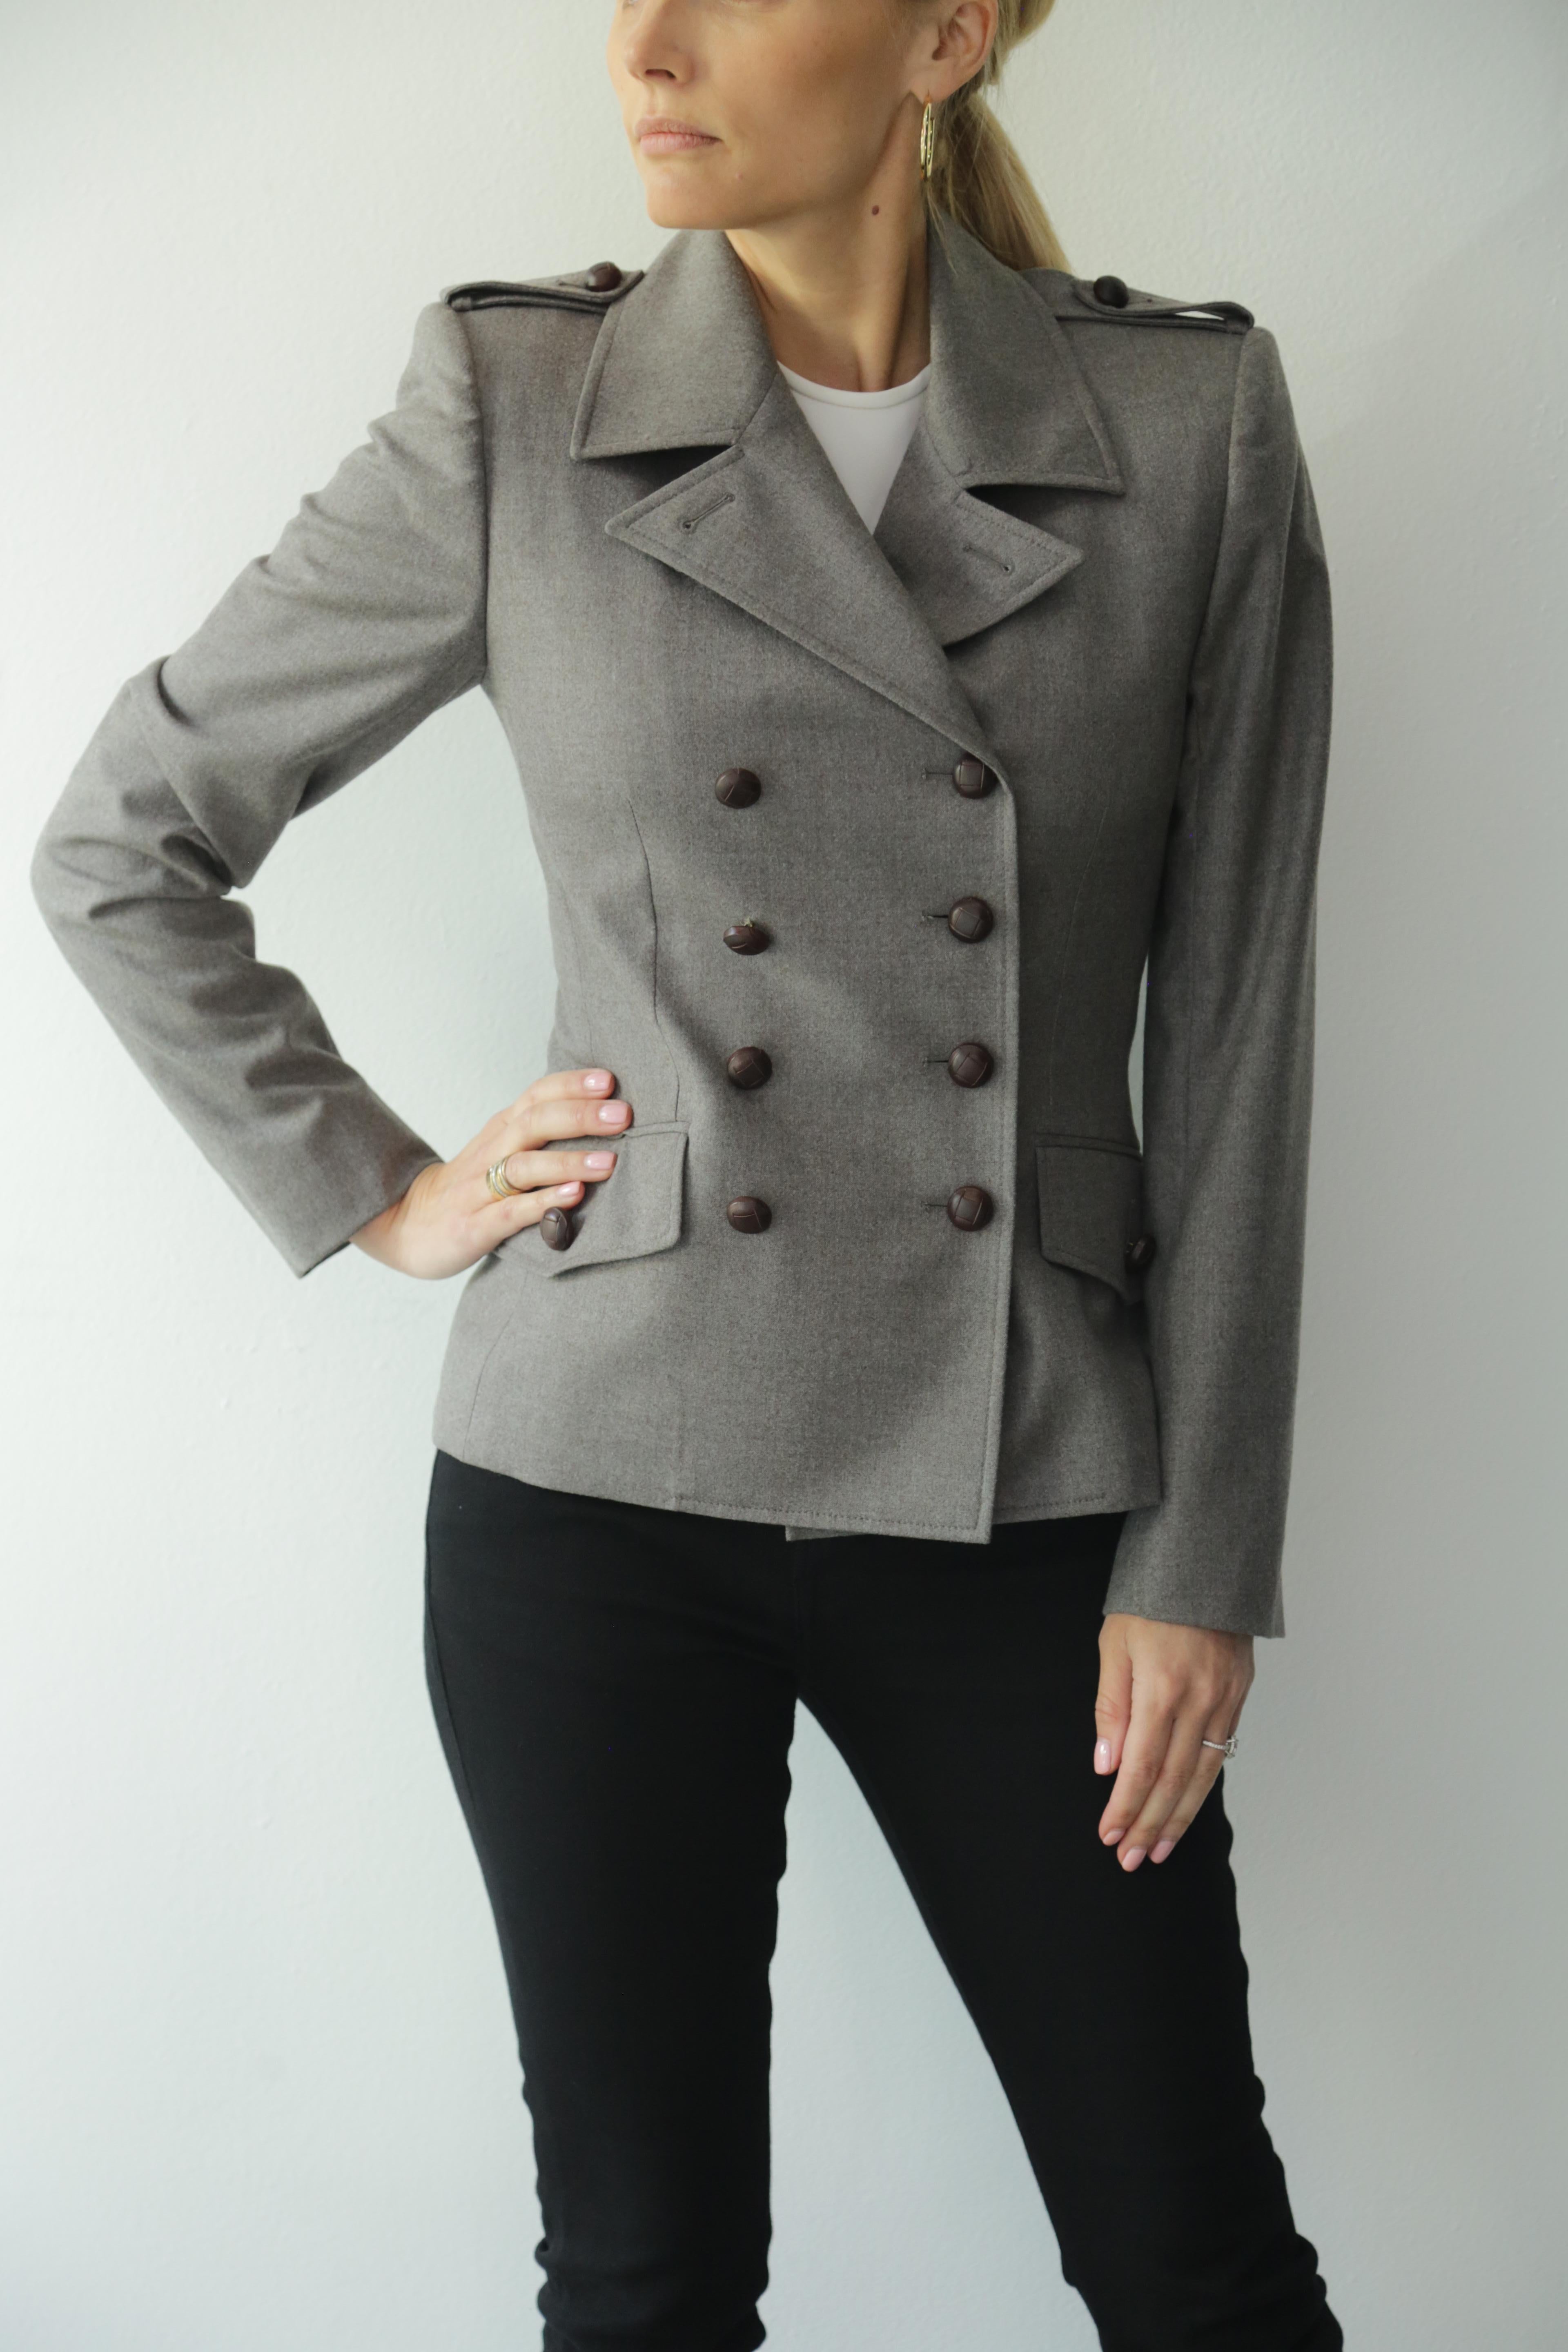 Yves Saint Laurent vintage, grey blazer jacket with brown leather covered buttons. 90s Decade. 
The jacket can be worn with the collar buttoned up, or with the collar open and folded down like a blazer.
Great condition. 
97% fleece wool, 3% spandex